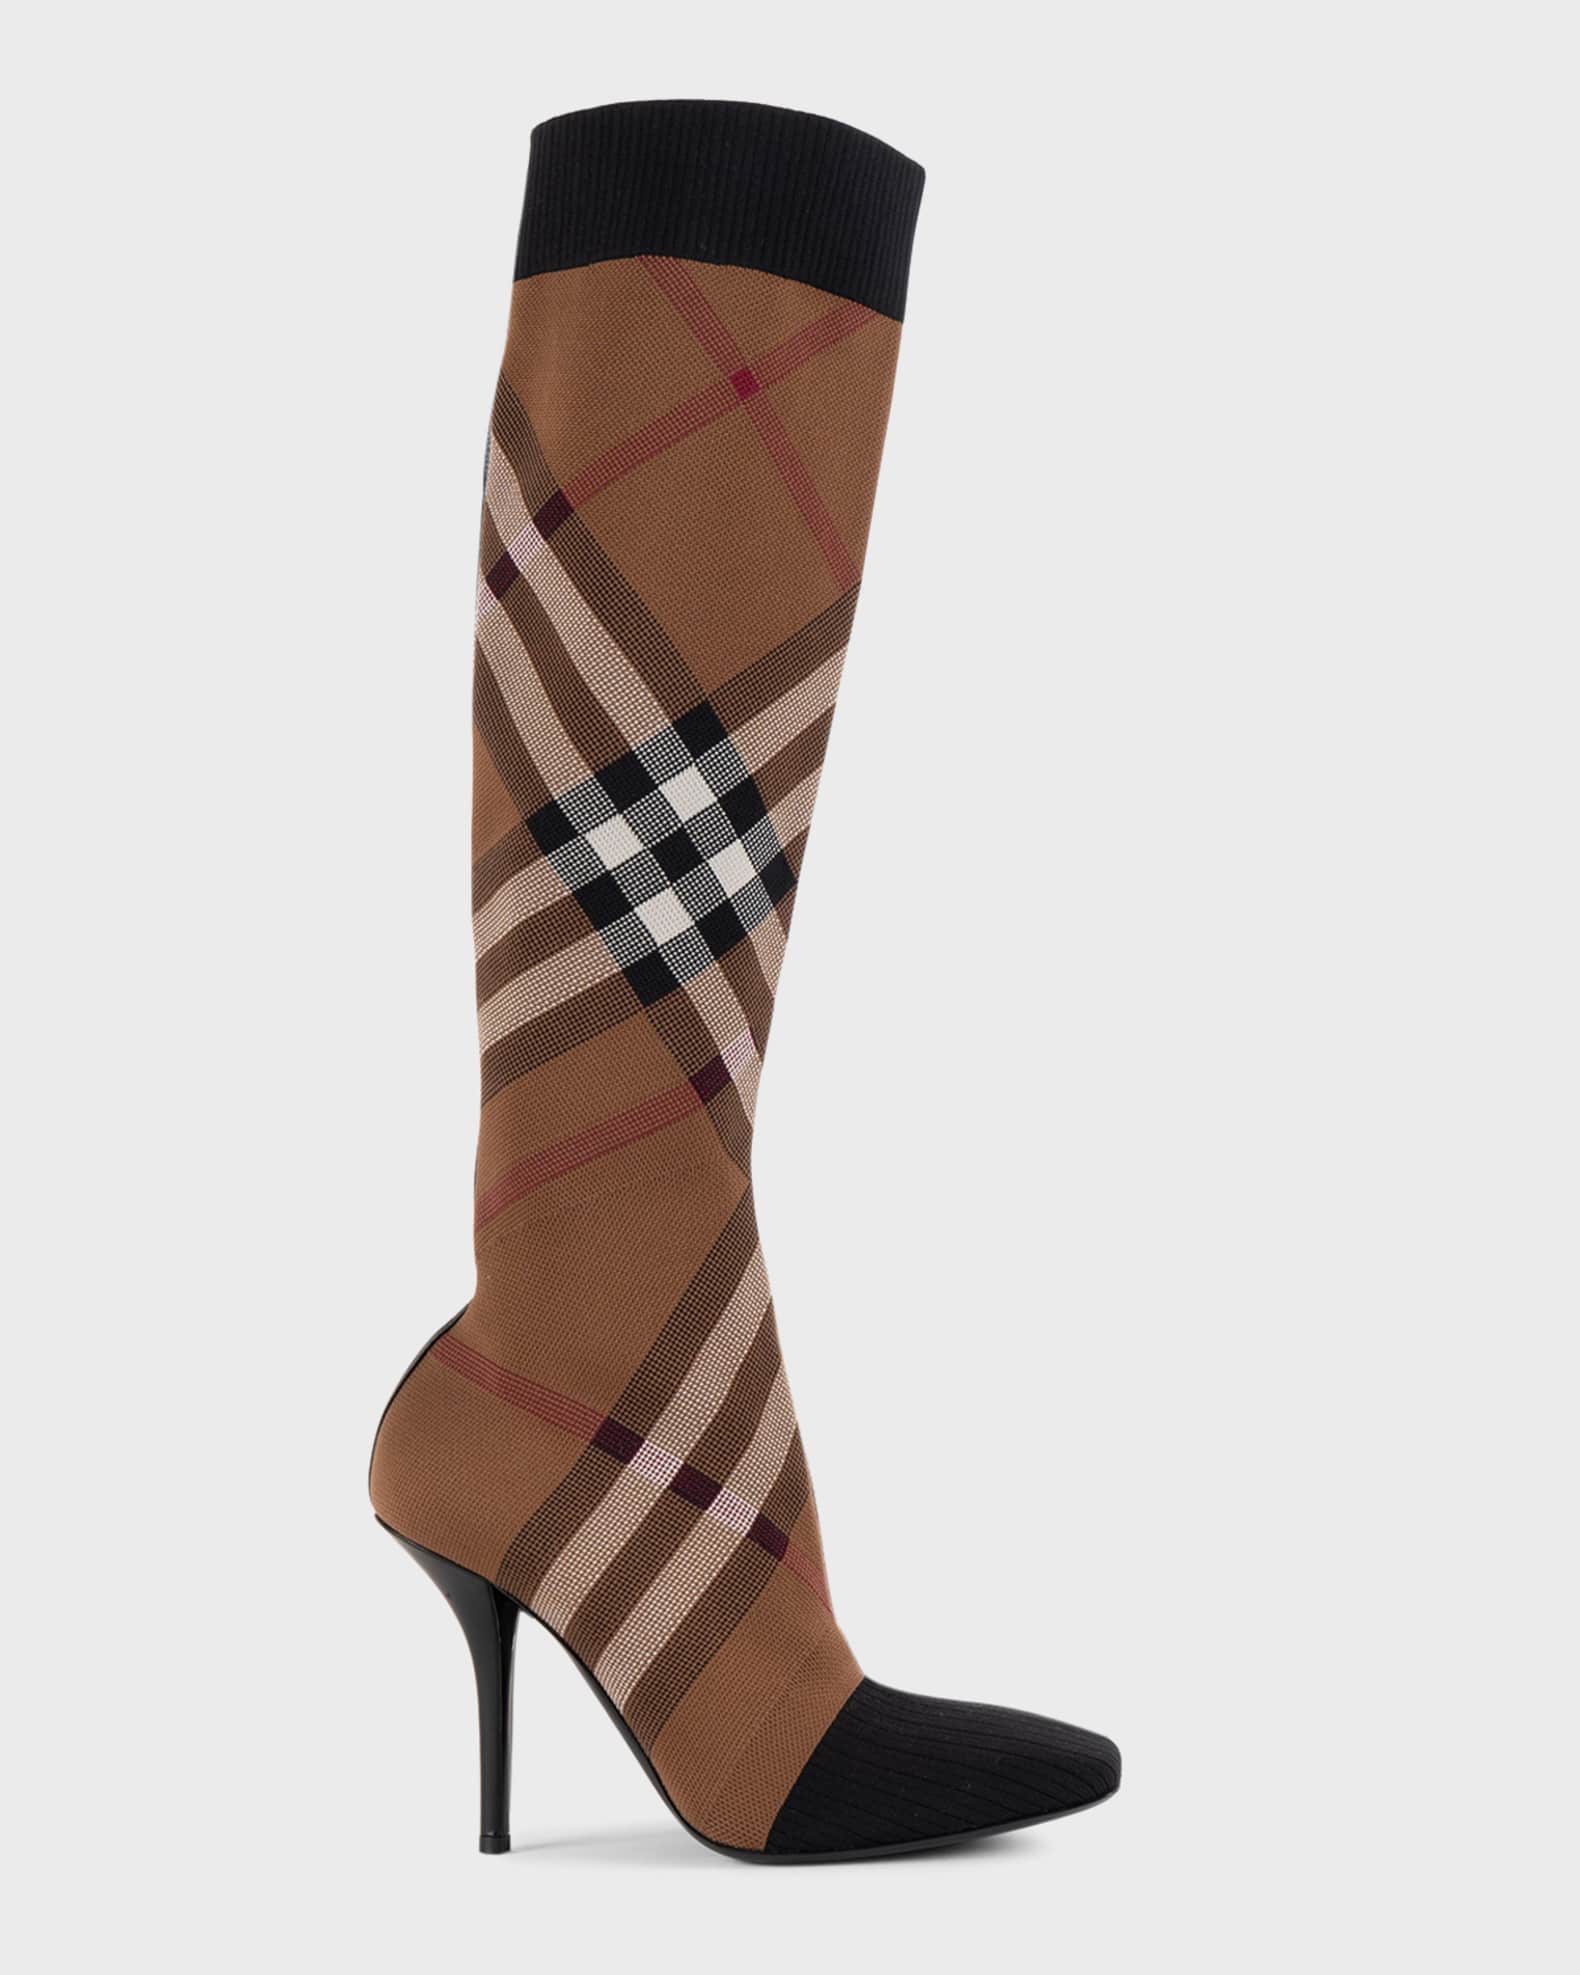 Distinctive Design: A Look at Burberry Dolman Boots